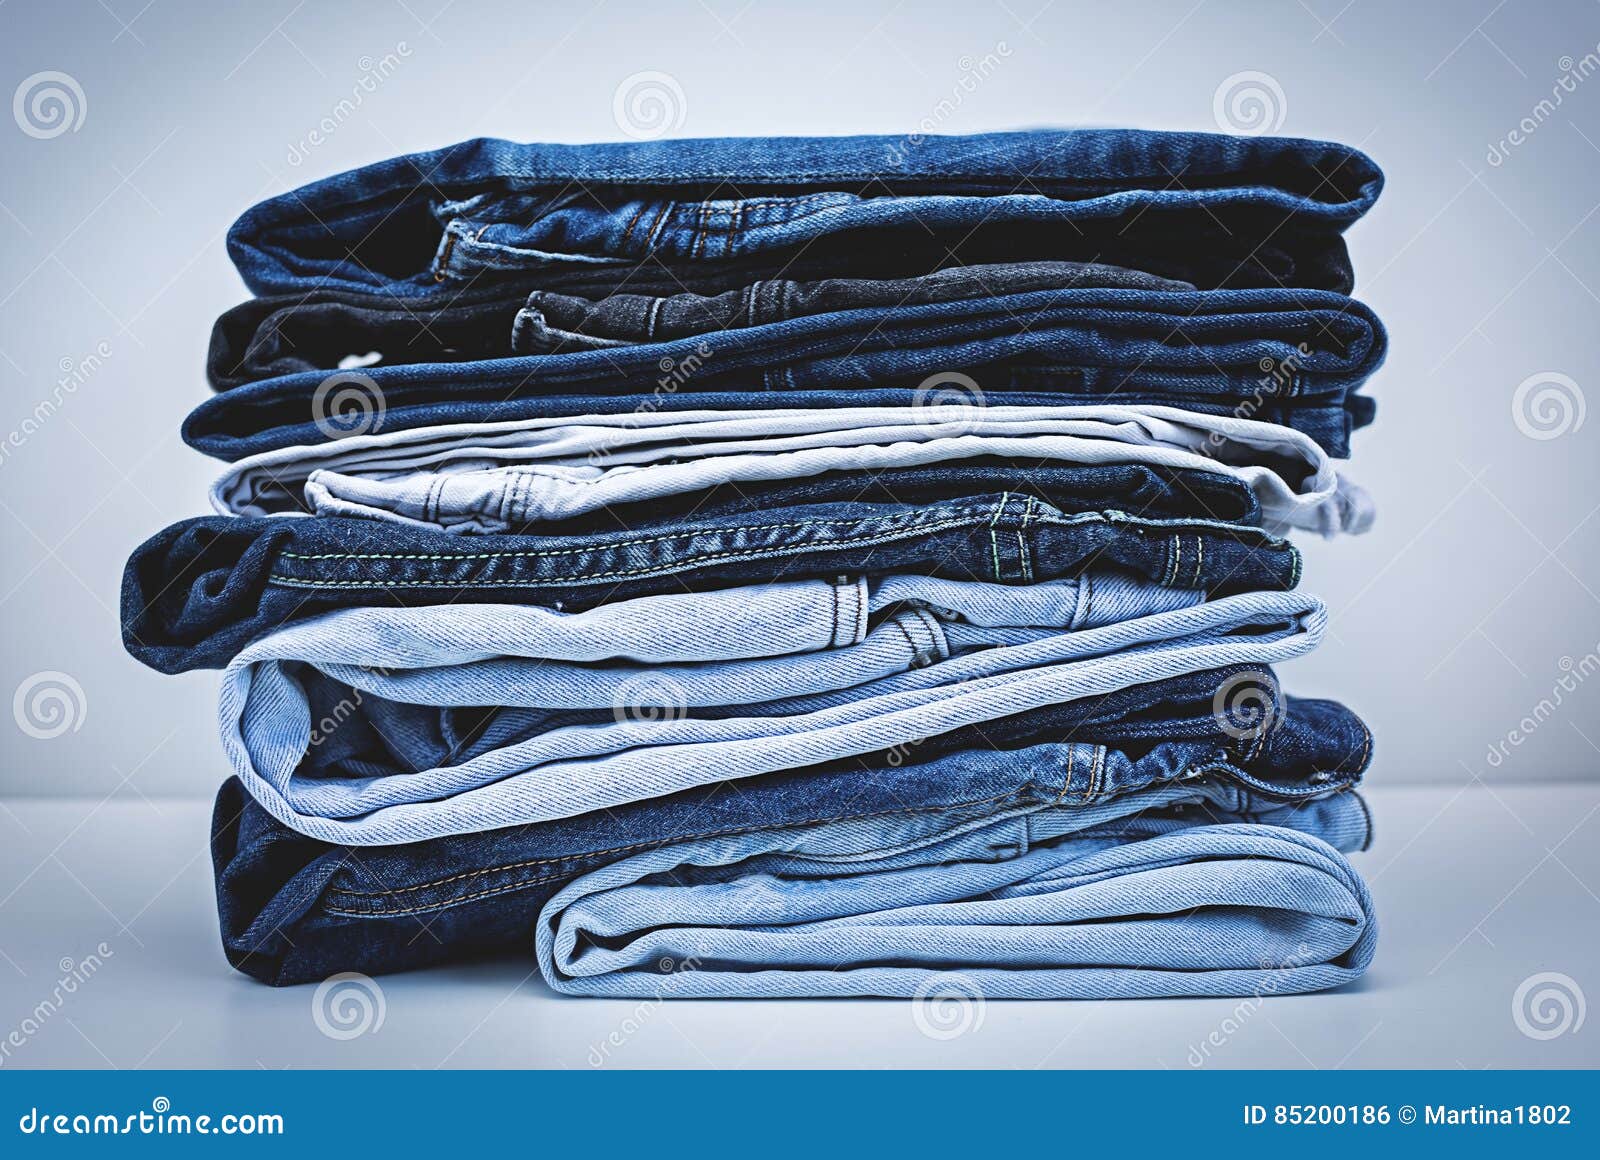 Pile of Jeans stock photo. Image of fashion, people, denim - 85200186